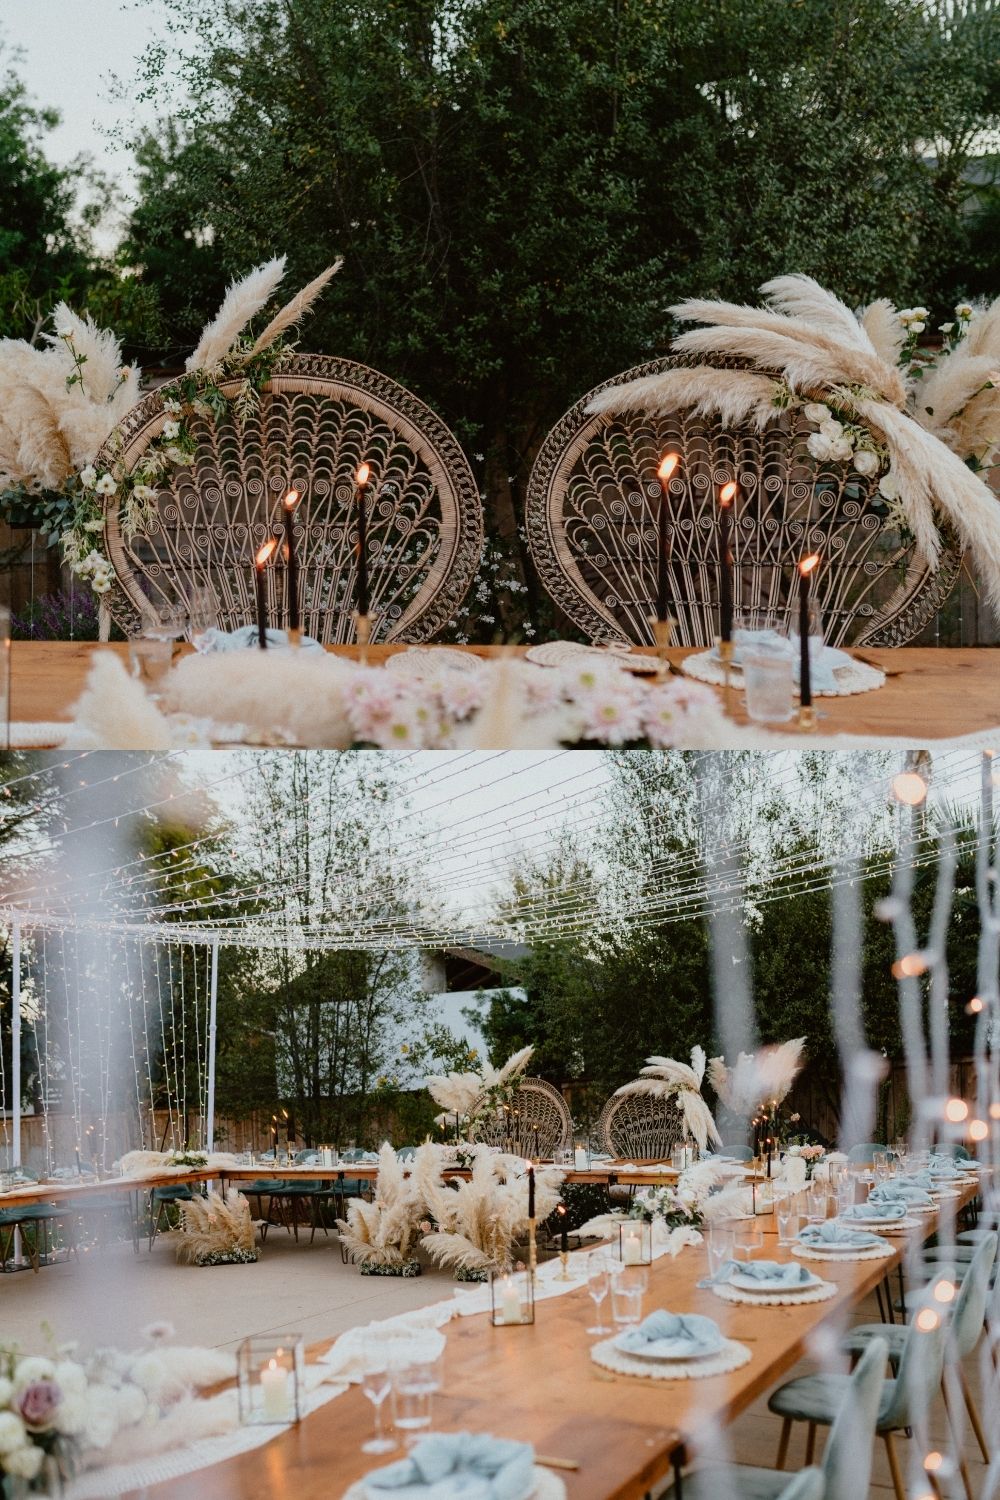 Romantic bohemian wedding inspiration with pampas grass and wicker chairs, romantic wedding accent inspiration | San Diego Wedding Photographer, San Diego California Elopement Photographer, Destination Wedding Photographer, Destination Elopement Photographer, Newlywed moments ideas, Newlywed Photography inspiration, California Elopement ideas, San Diego Wedding Inspiration, Romantic Boho Wedding Ideas, Romantic Elopement Inspiration, Bohemian Wedding Ideas | chelseaabril.com